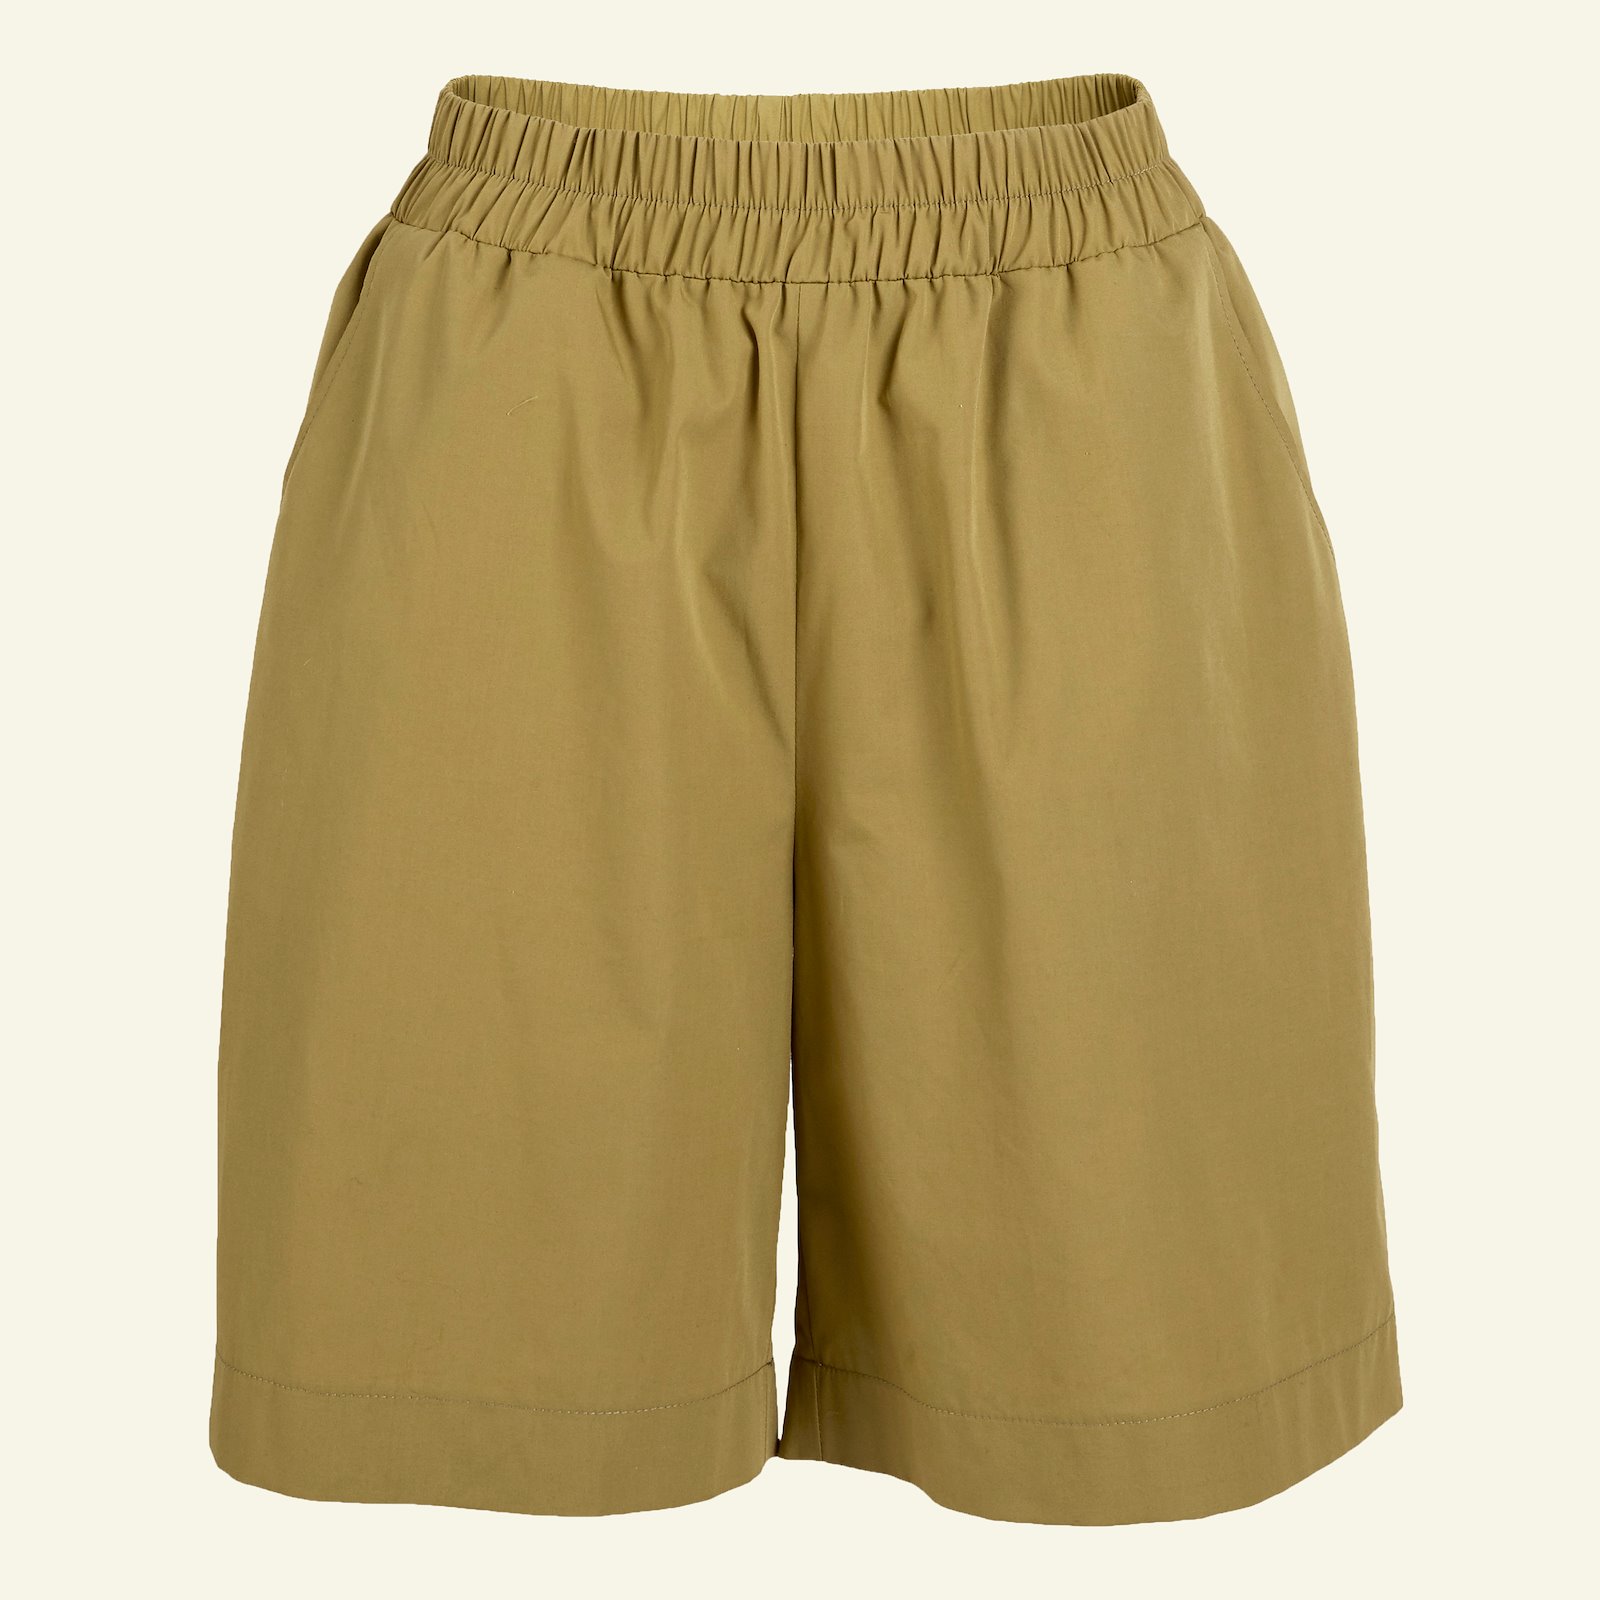 Wide trousers/shorts w. pockets, 44/16 p20051_501926_sskit